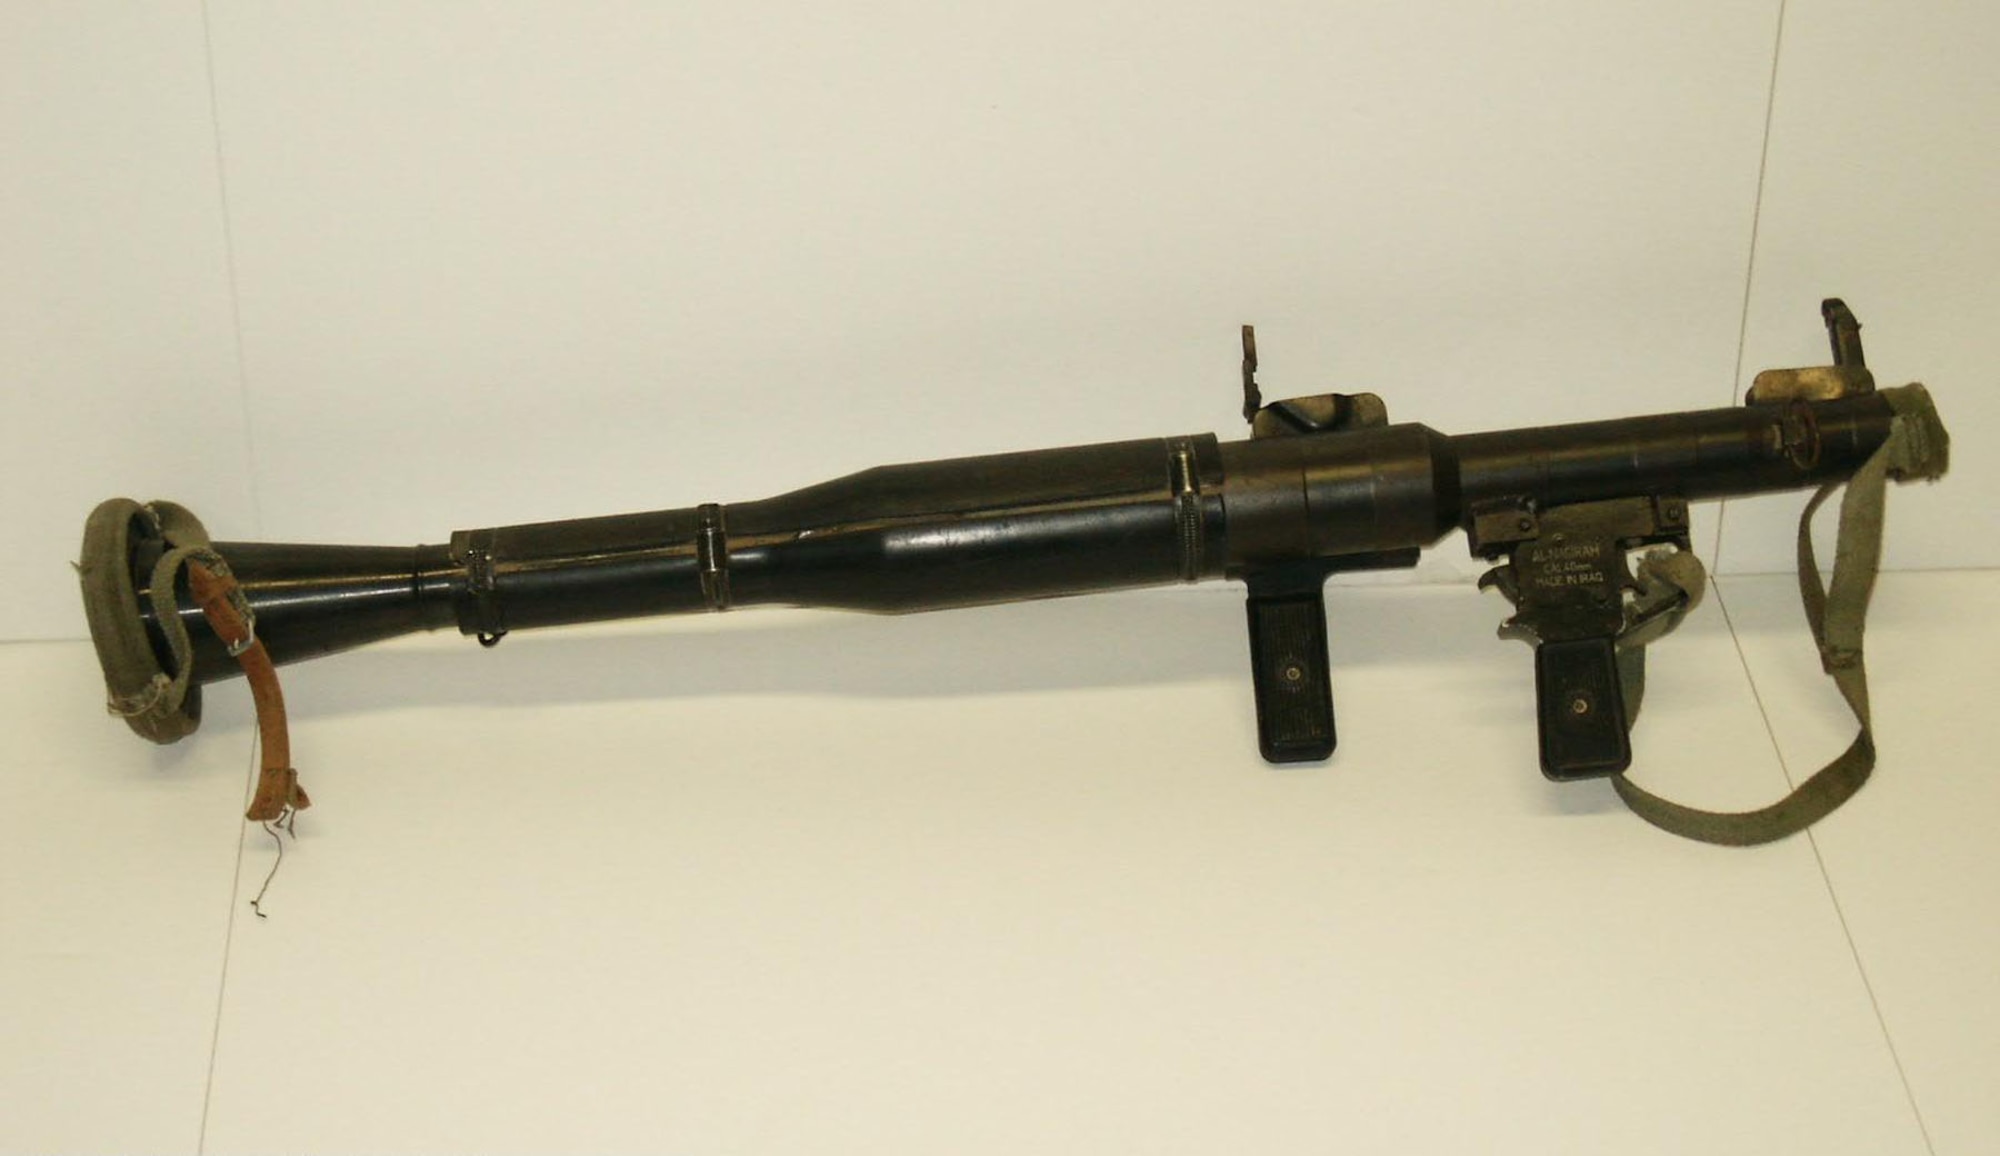 A copy of the USSR RPG-7, this shoulder-fired, anti-tank grenade launcher fires an 85mm rocket-assisted grenade. (U.S. Air Force photo)